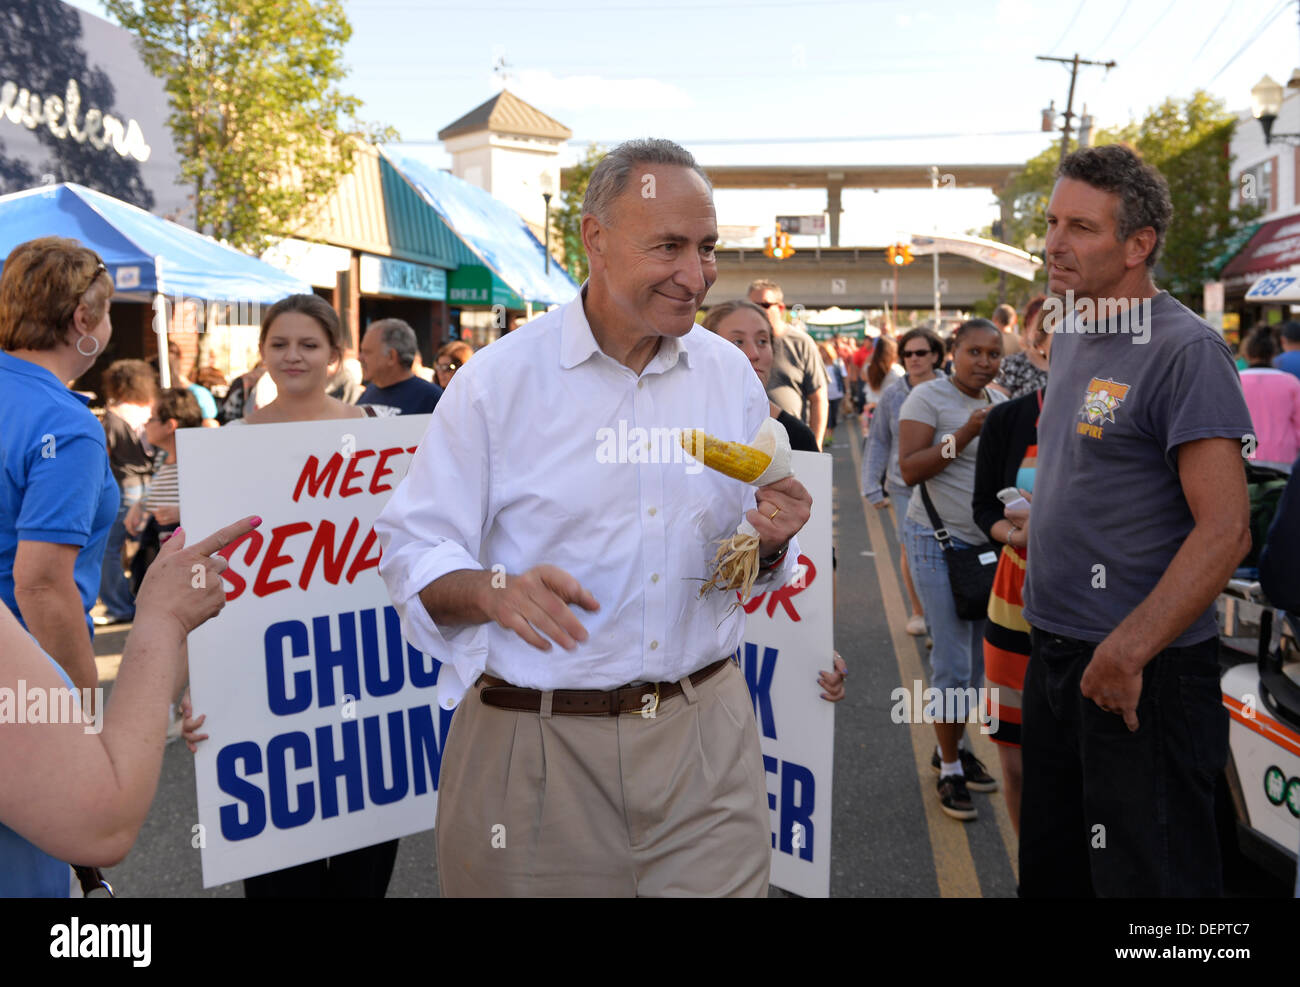 Bellmore, New York, U.S. 22nd September 2013. U.S. Senator CHARLES 'CHUCK' SCHUMER  (Democrat), running for re-election in November, makes a campaign visit at the 27th Annual Bellmore Festival, featuring family fun with exhibits and attractions in a 25 square block area, with over 120,000 people expected to attend over the weekend. Credit:  Ann E Parry/Alamy Live News Stock Photo